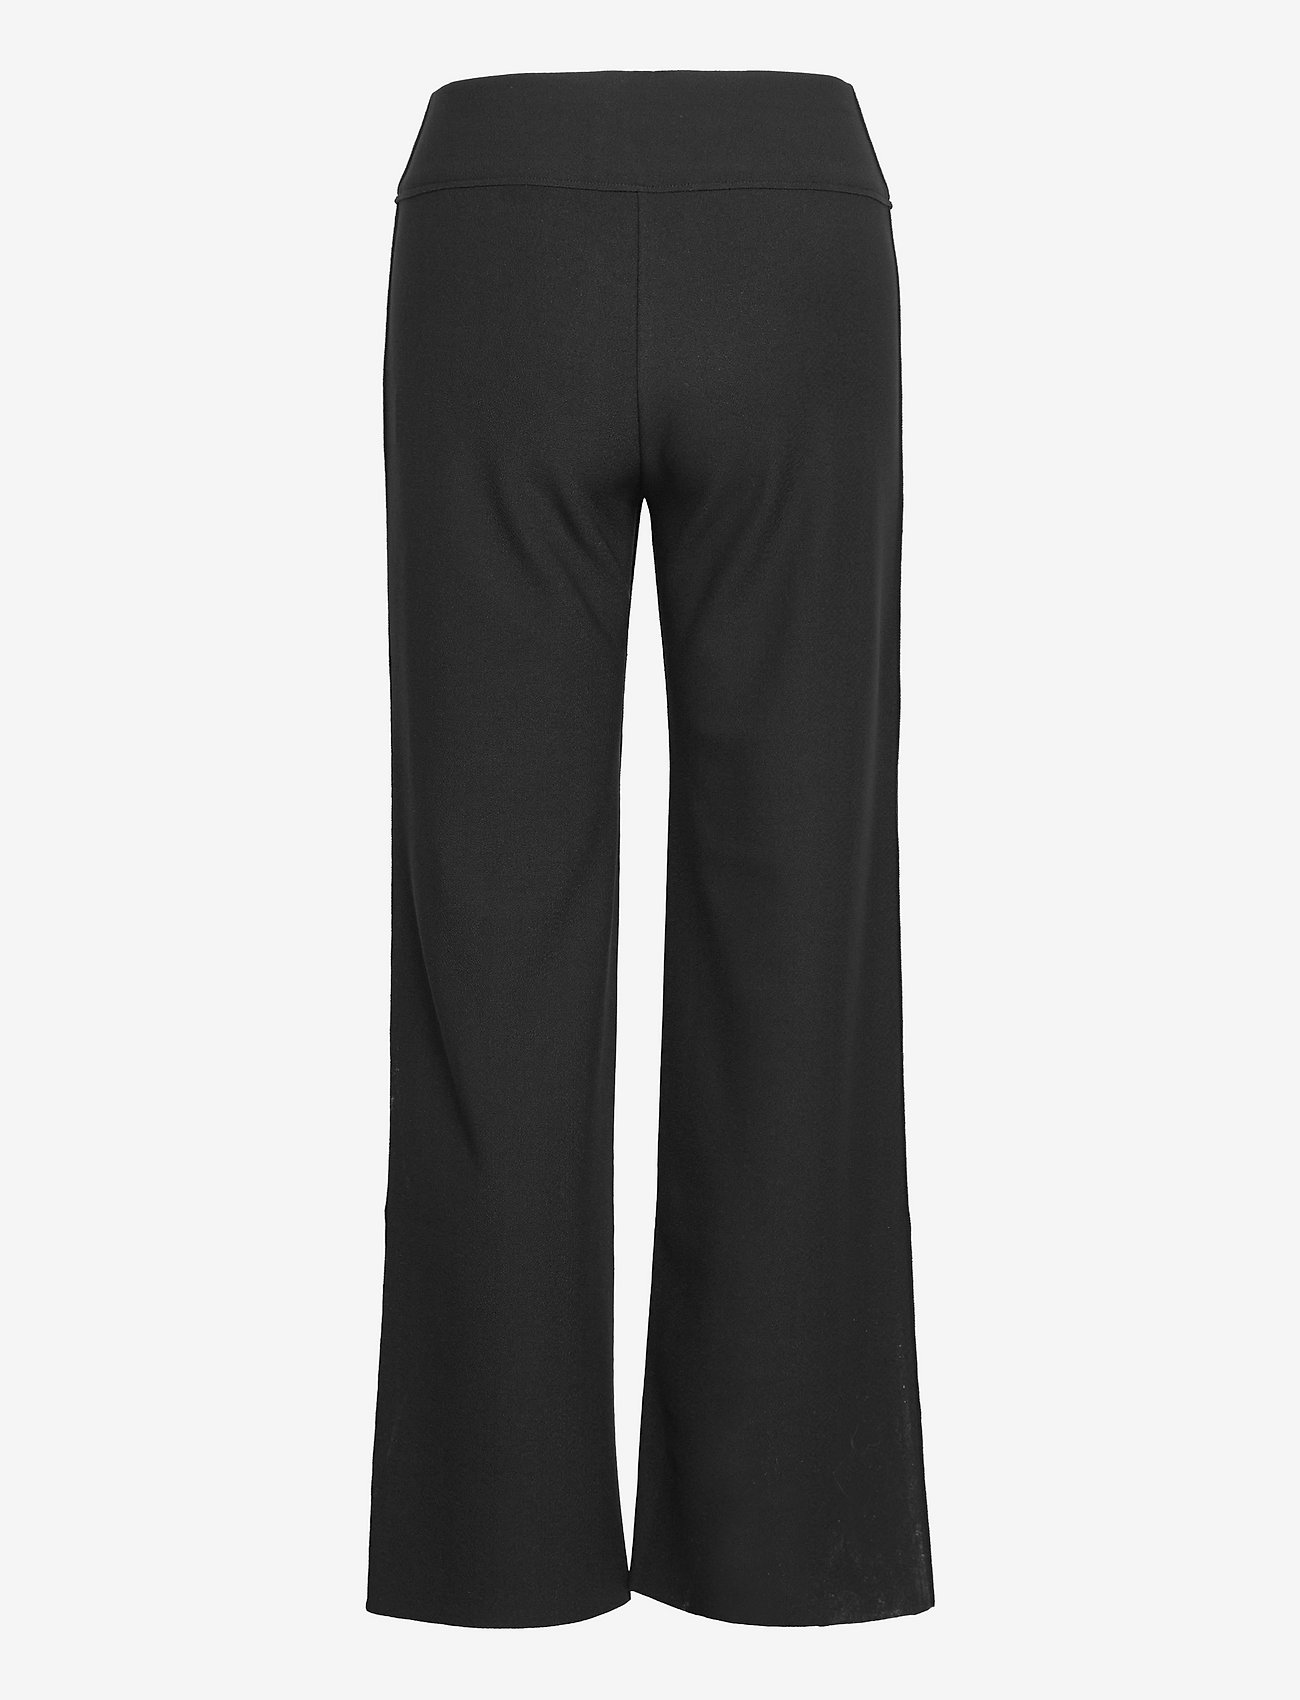 Marville Road - Angie Short Trousers - damen - black - 1